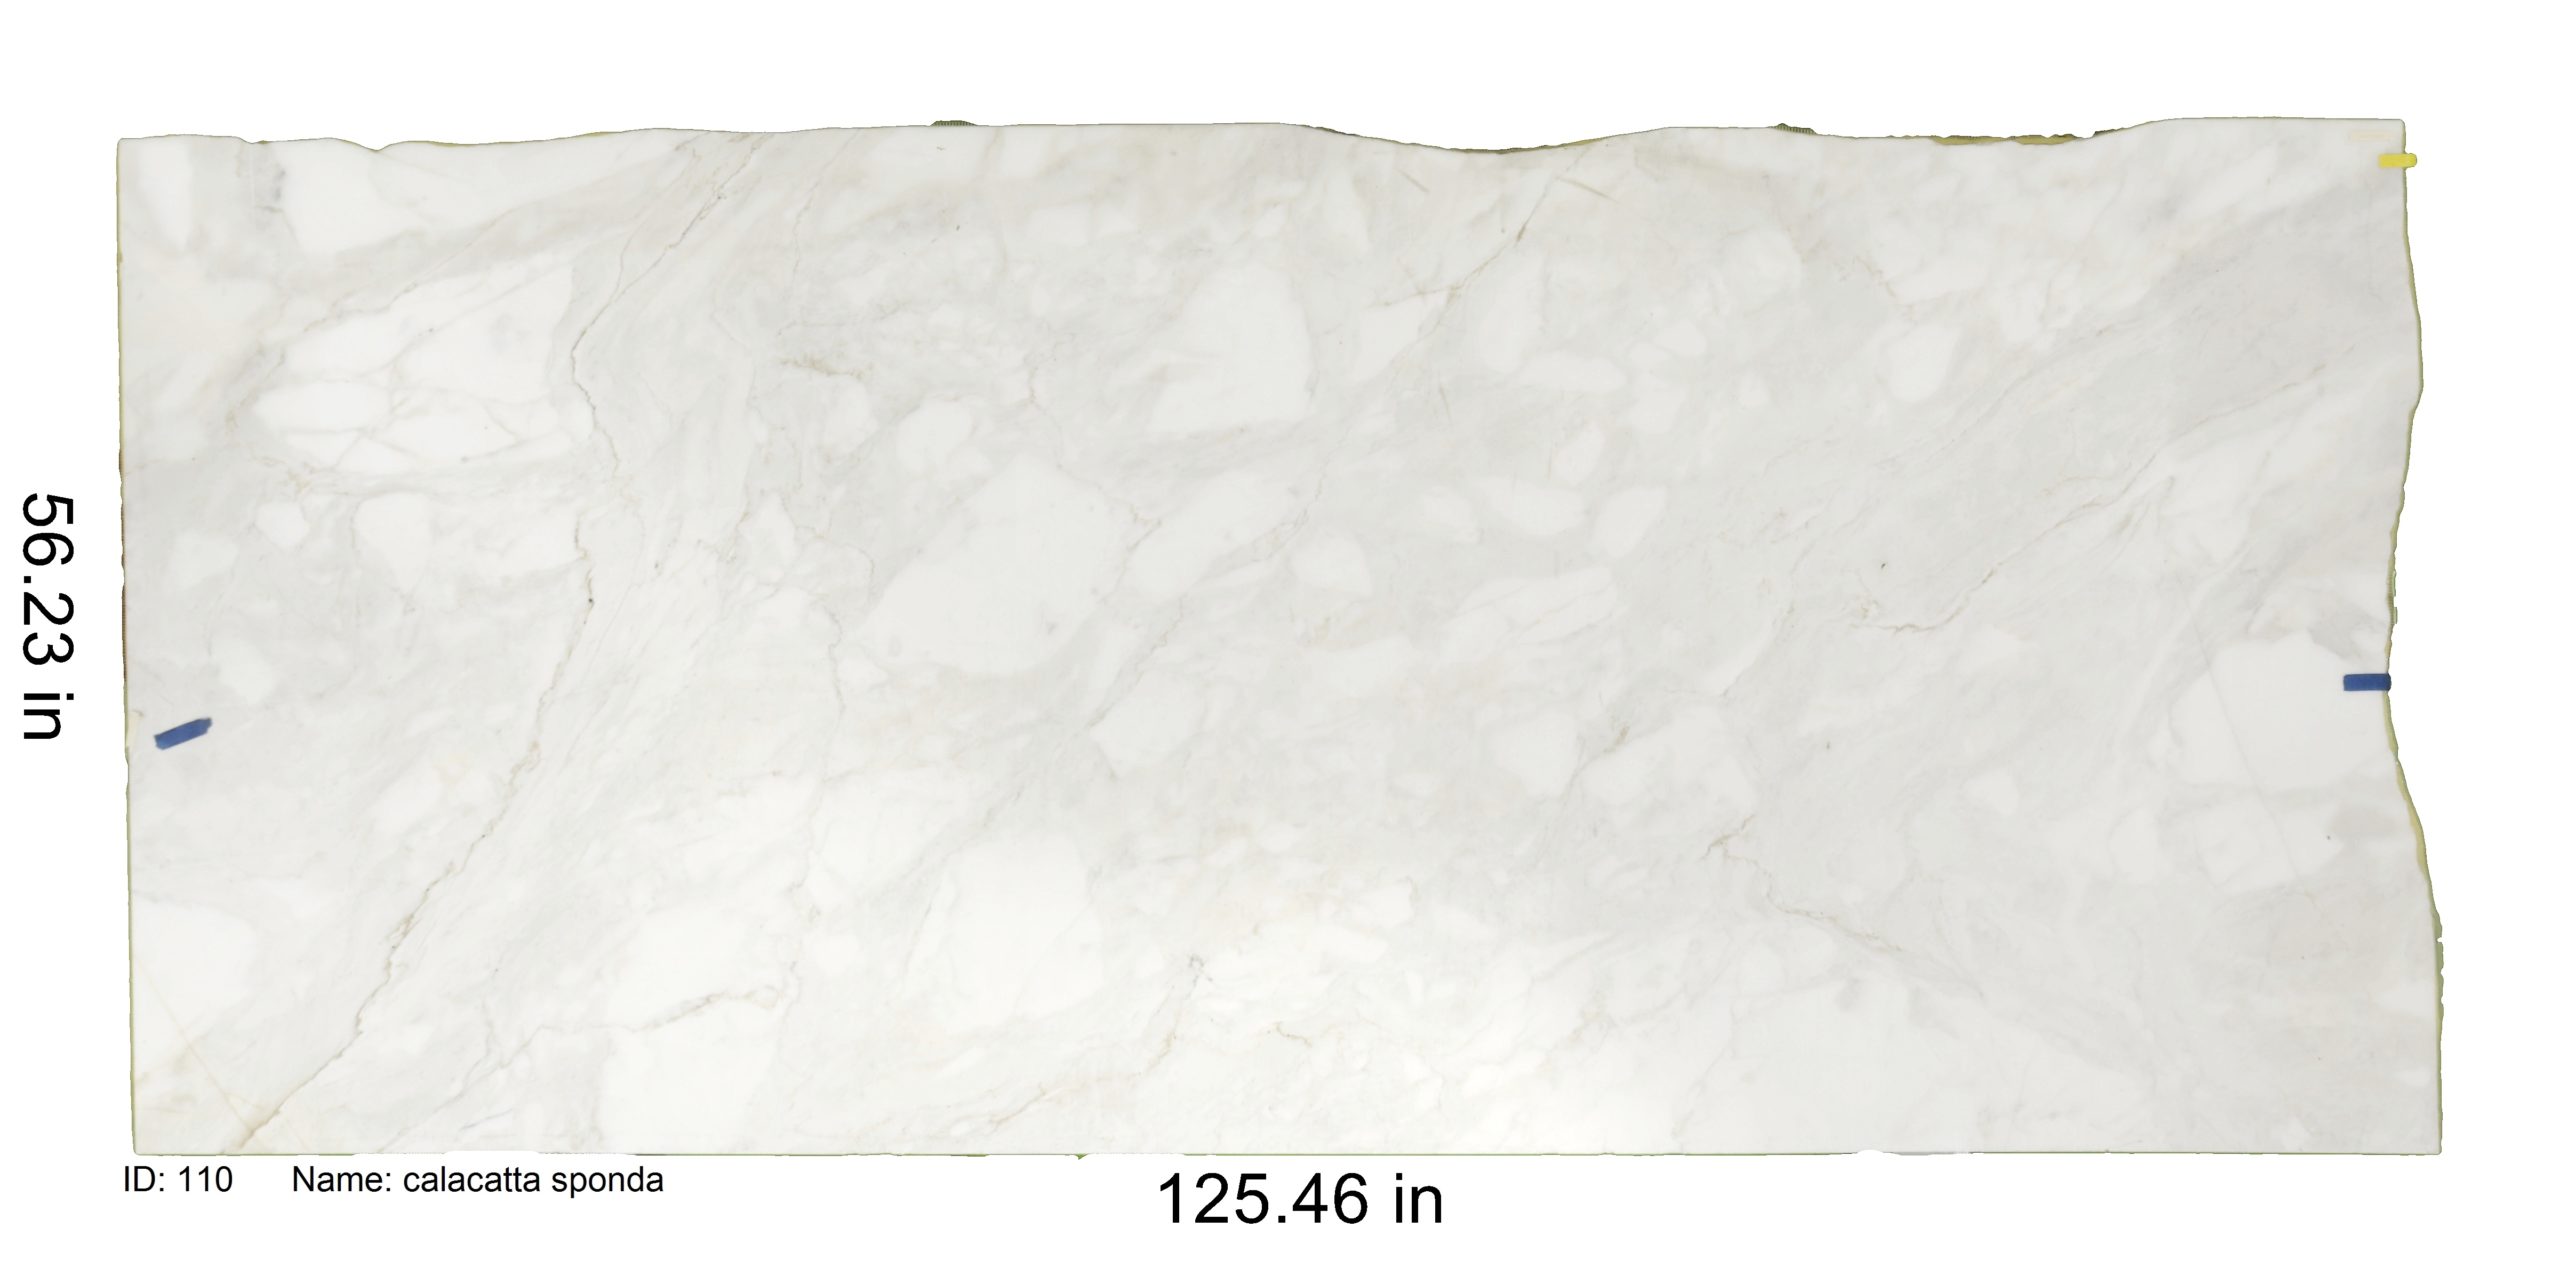 White Marble With Heavy Grey Veining<br />
ID: 110<br />
Name: Calacatta Sponda<br />
Size: 56.3X125.46